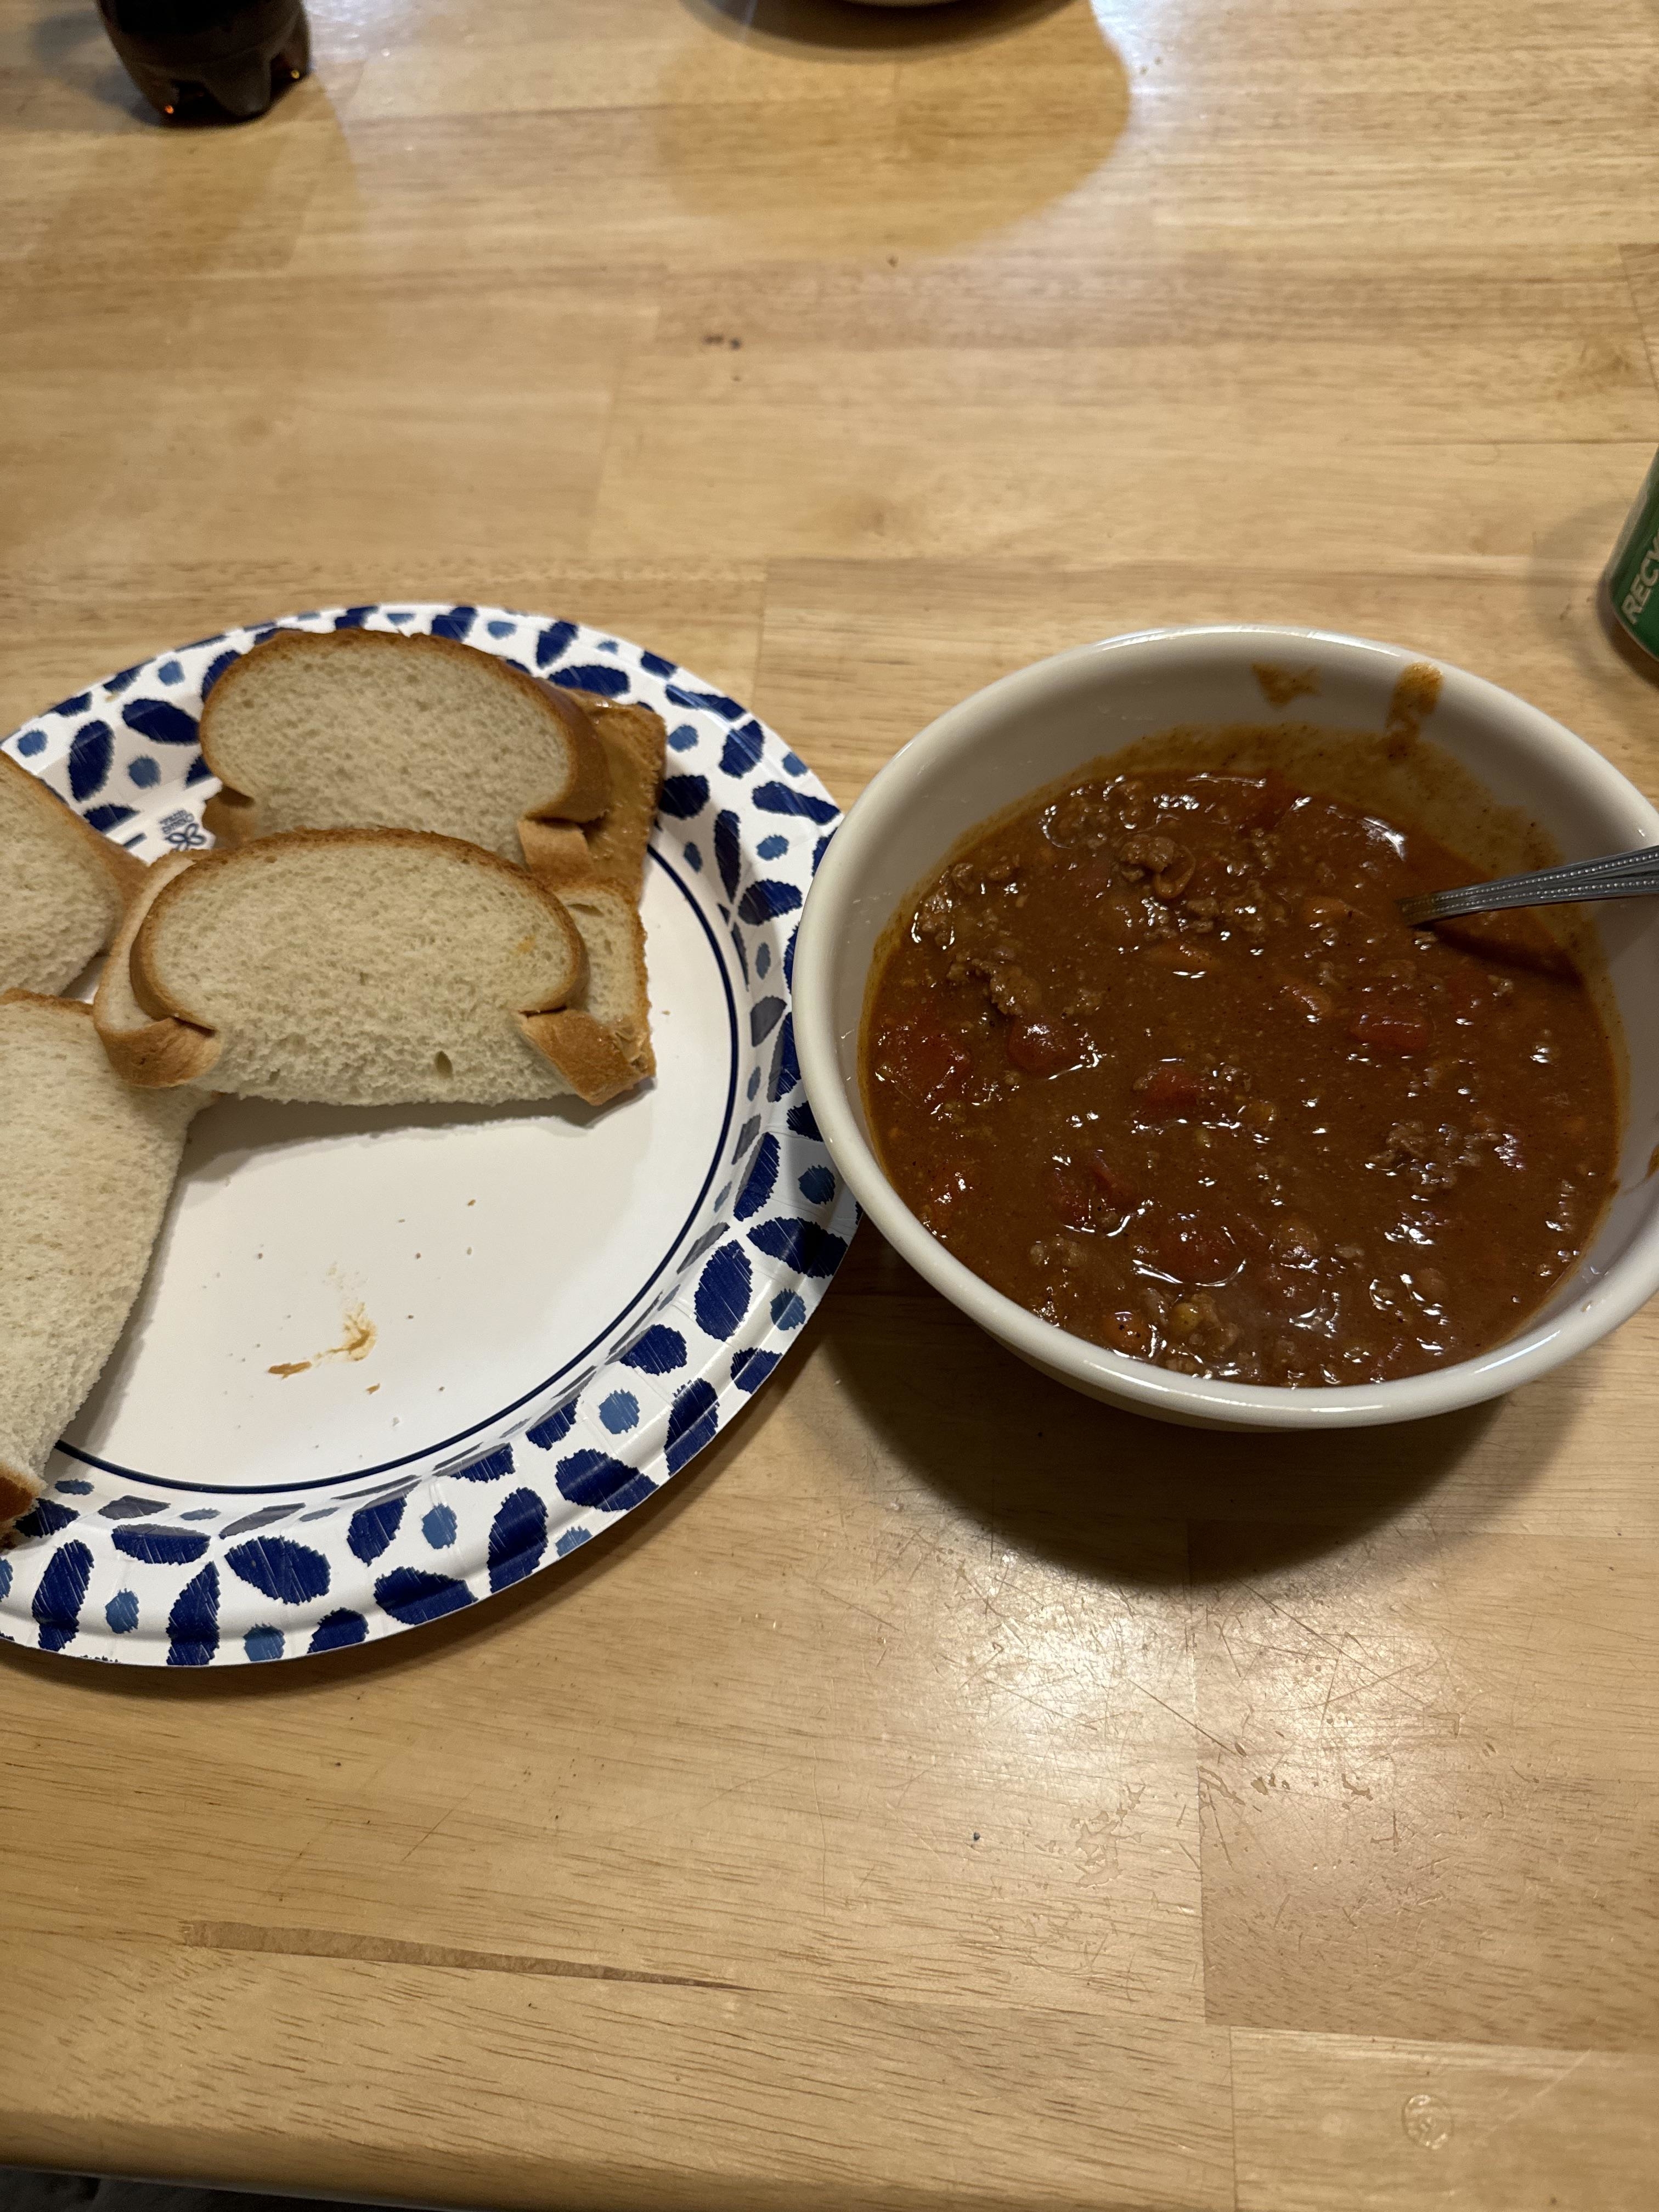 A bowl of chili next to a plate with two slices of bread with peanut butter